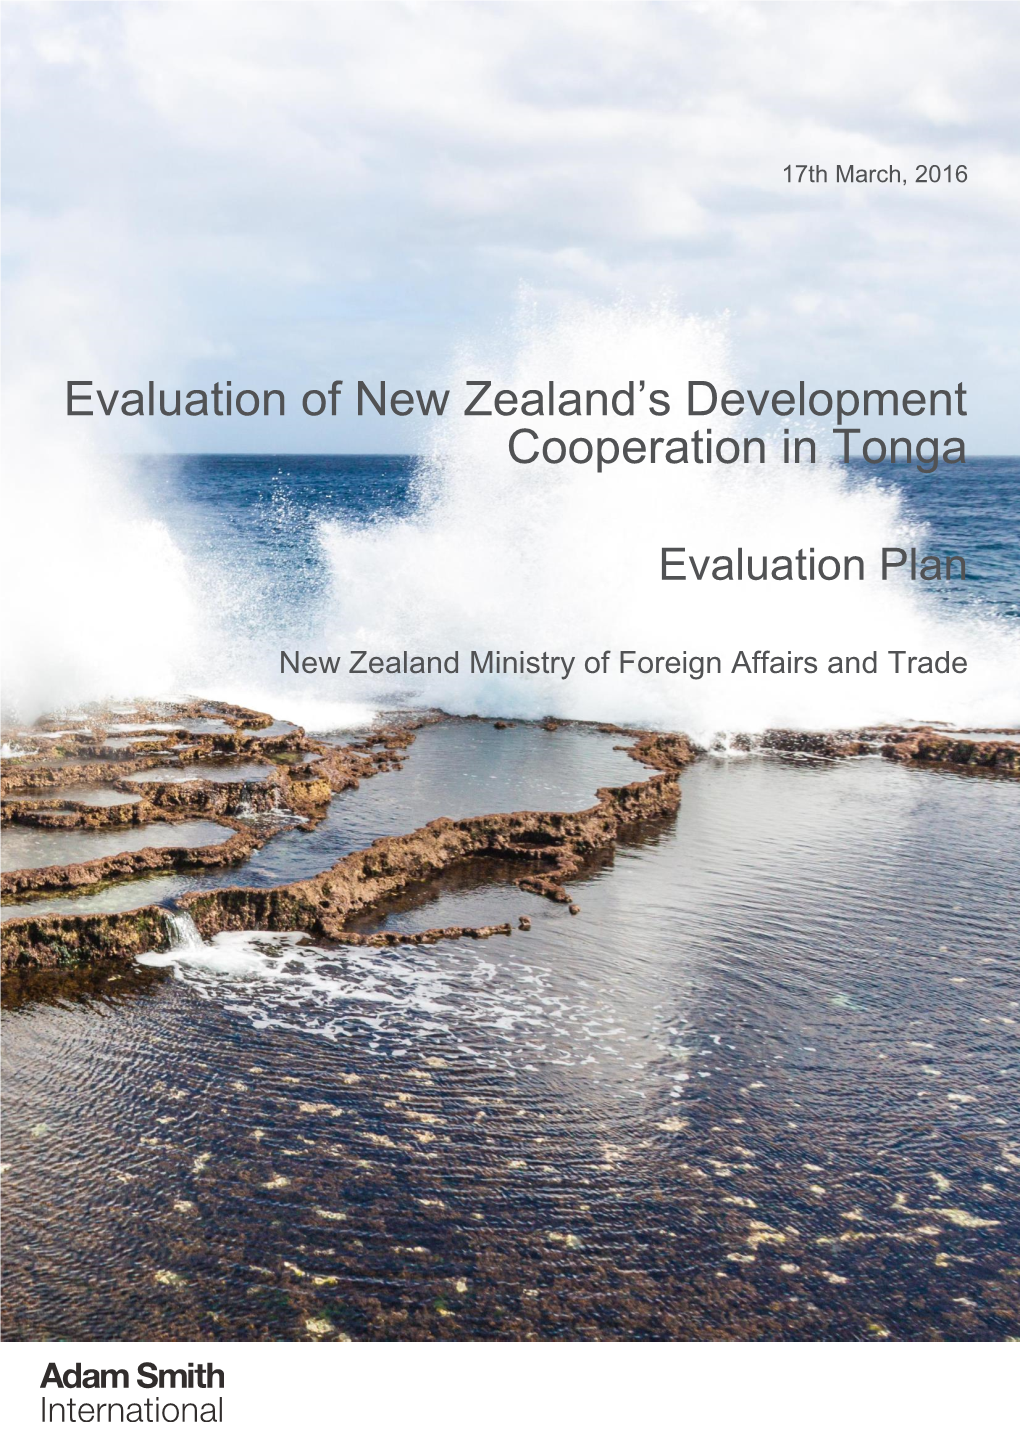 Evaluation of New Zealand's Development Cooperation in Tonga